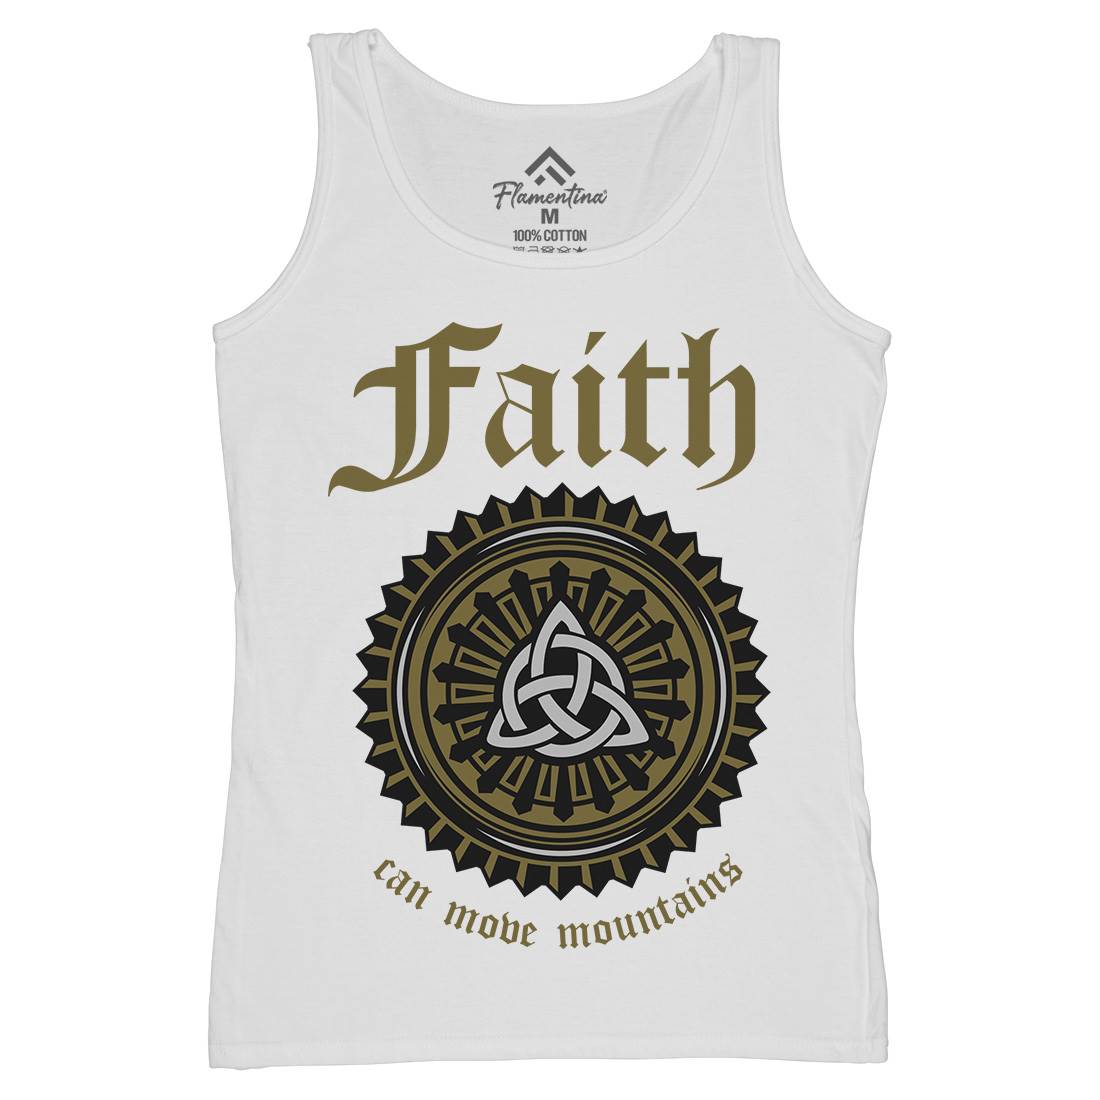 Faith Can Move Mountains Womens Organic Tank Top Vest Religion A314